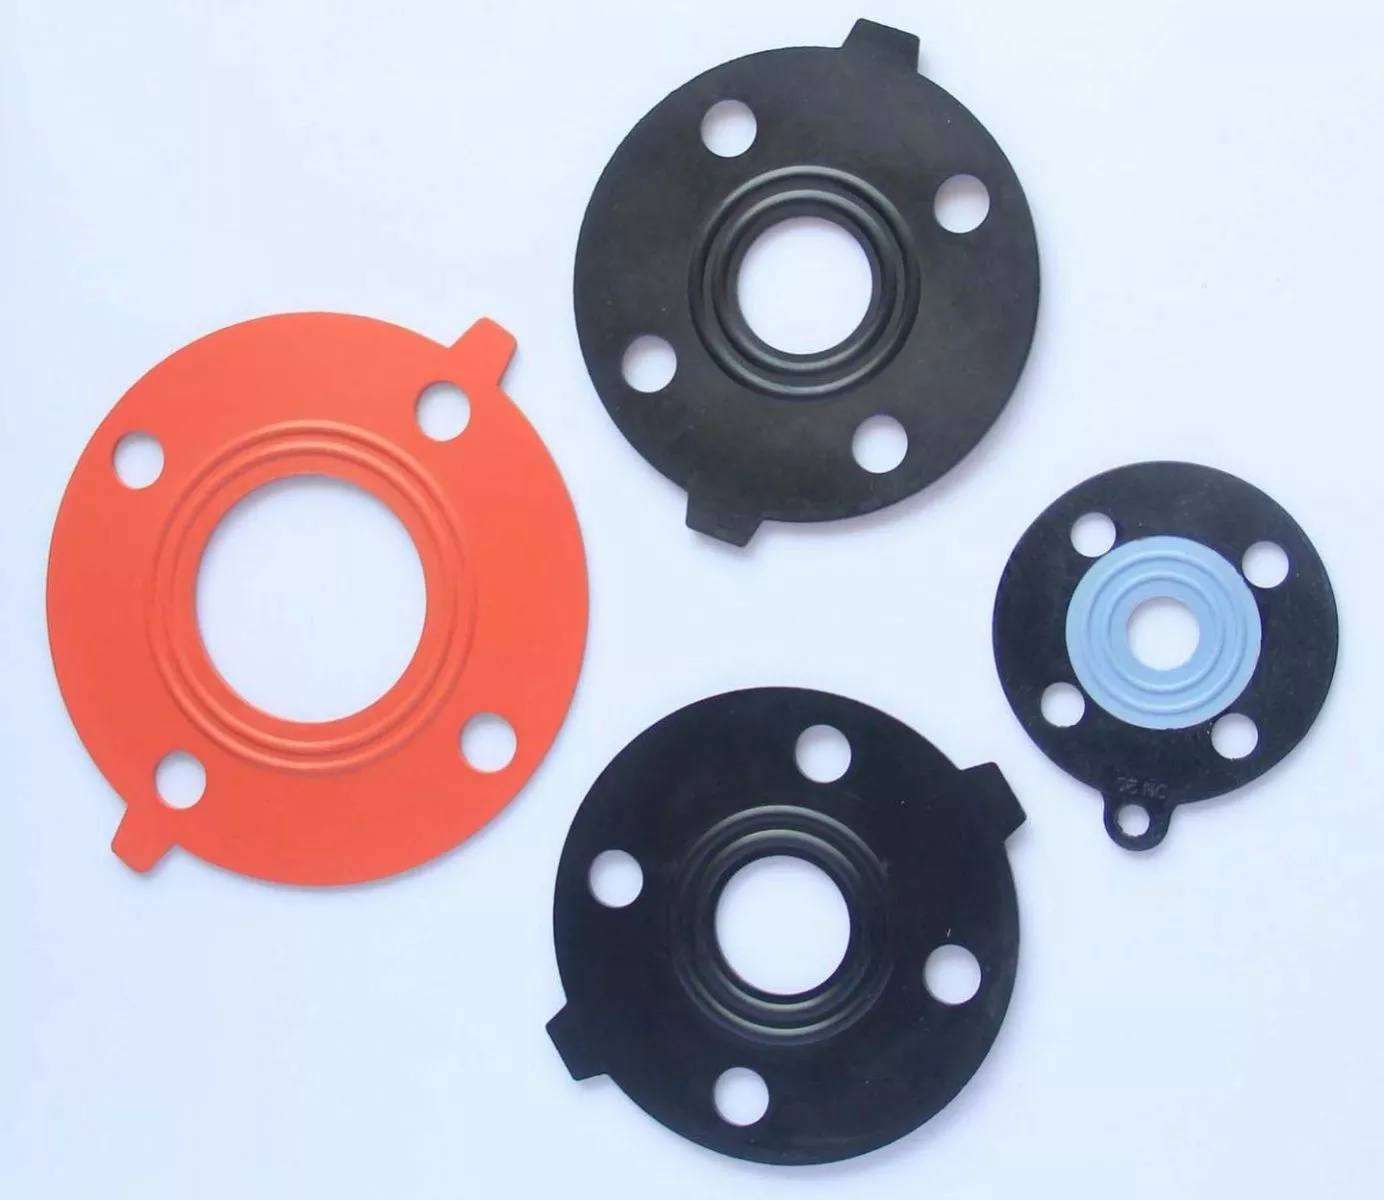 Several Key Points of Selecting Flange Gaskets